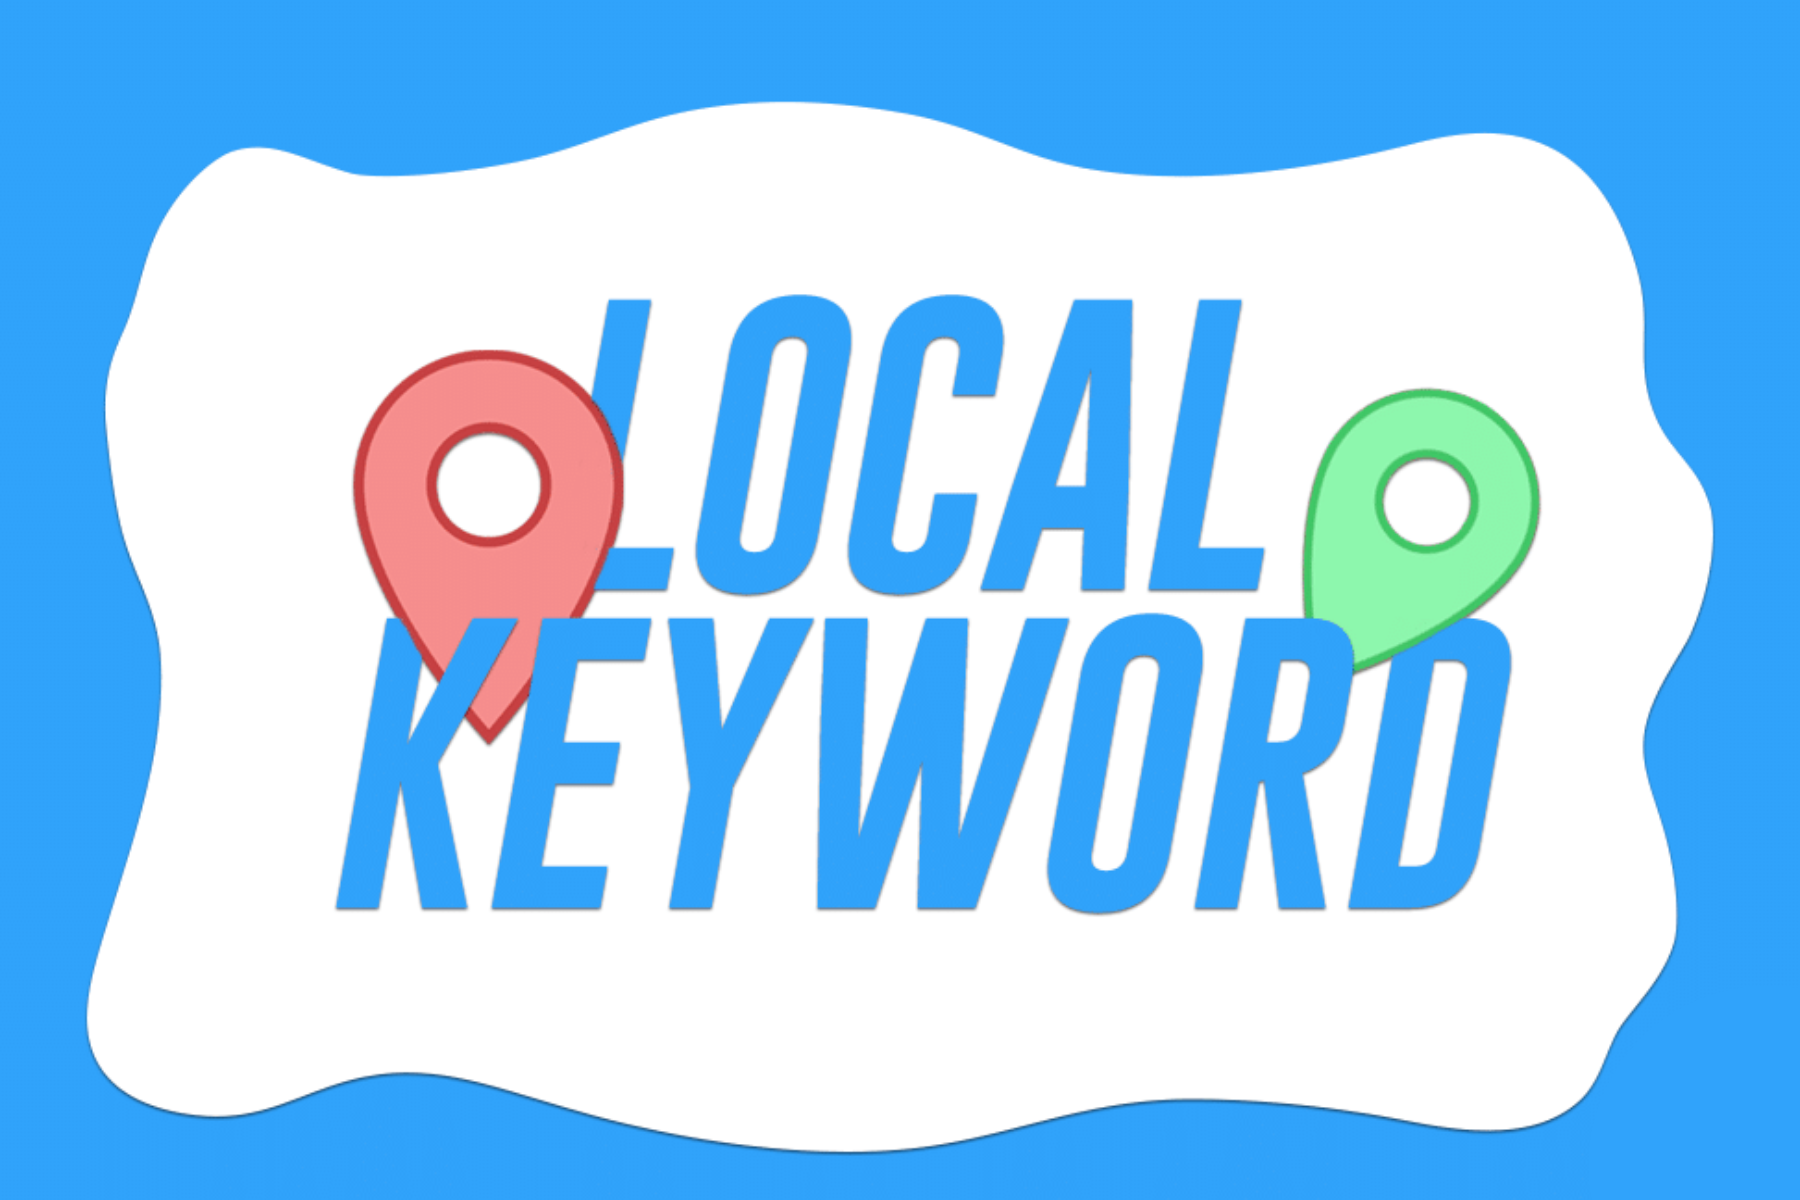 The words "Local Keywords" with a green and red pinpoints